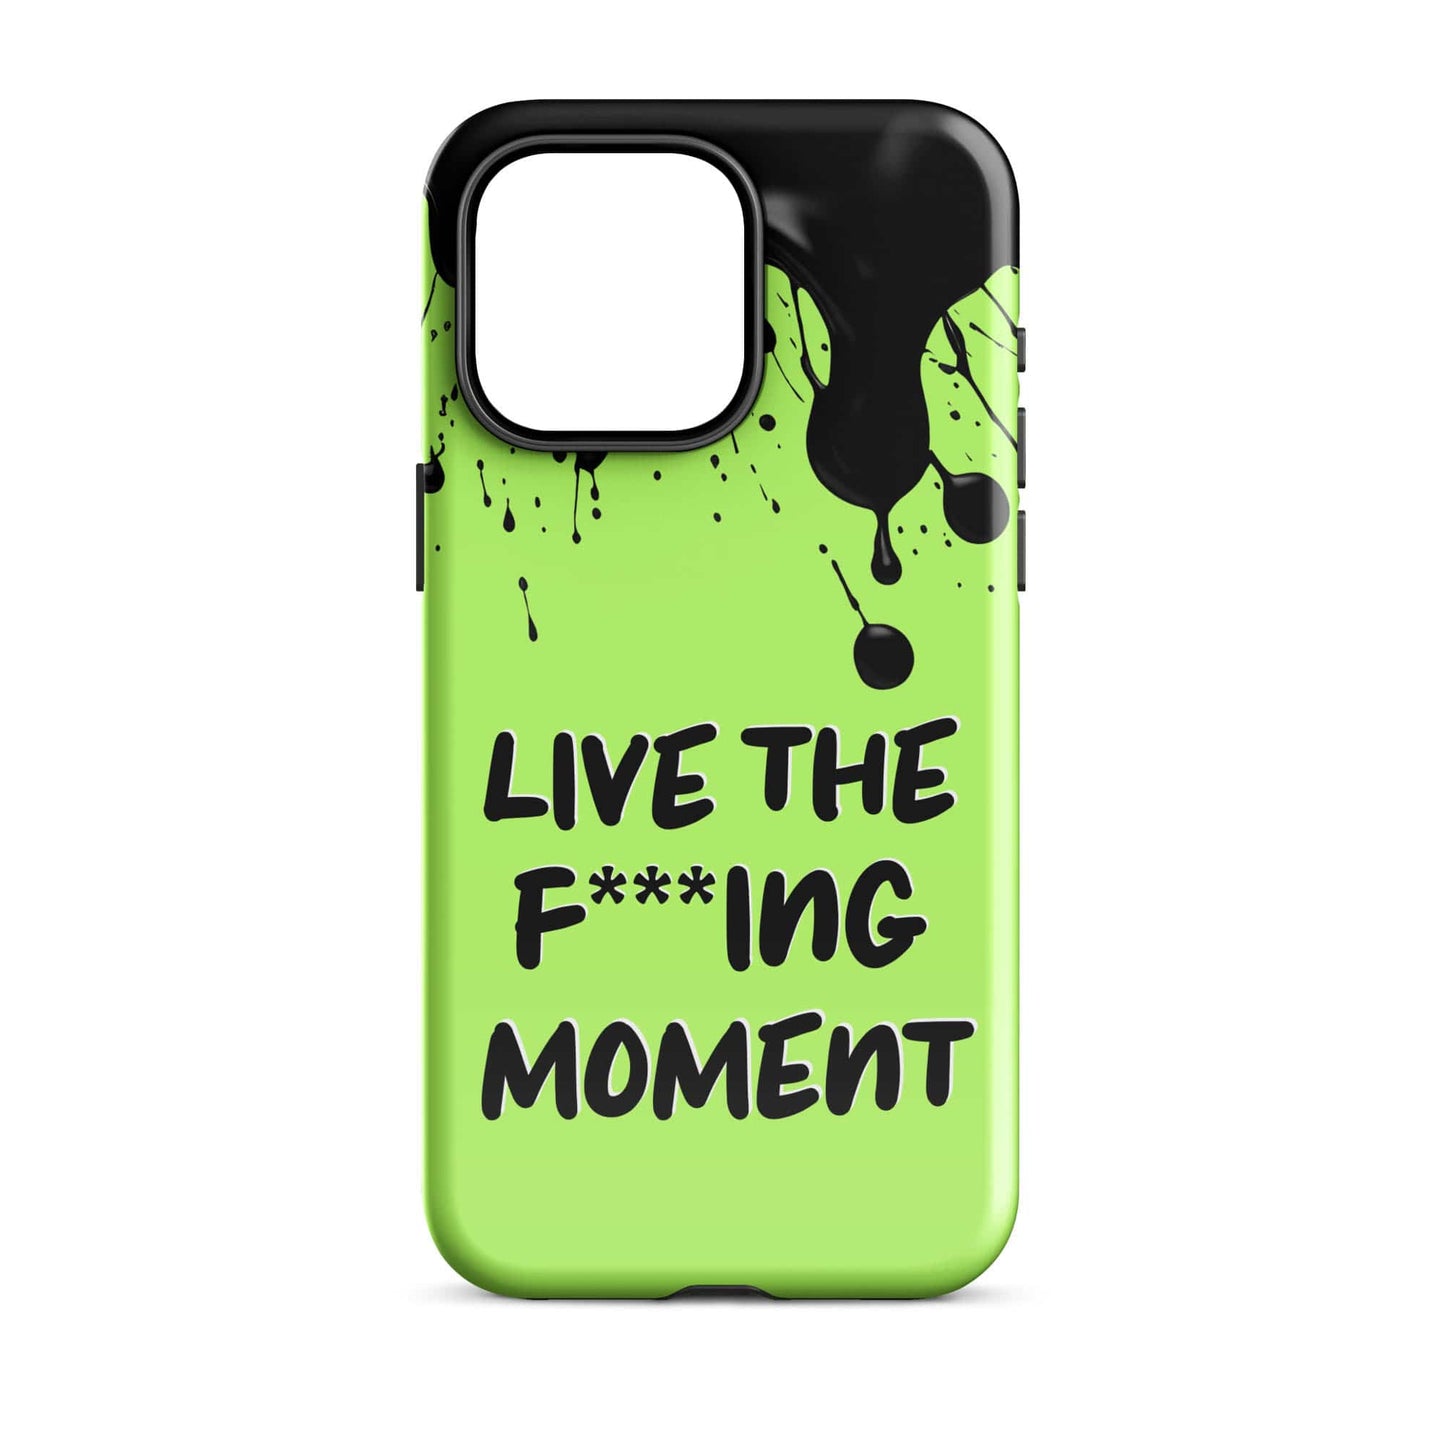 Live The F***ing Moment - (Lime Green) Quoted iPhone Case